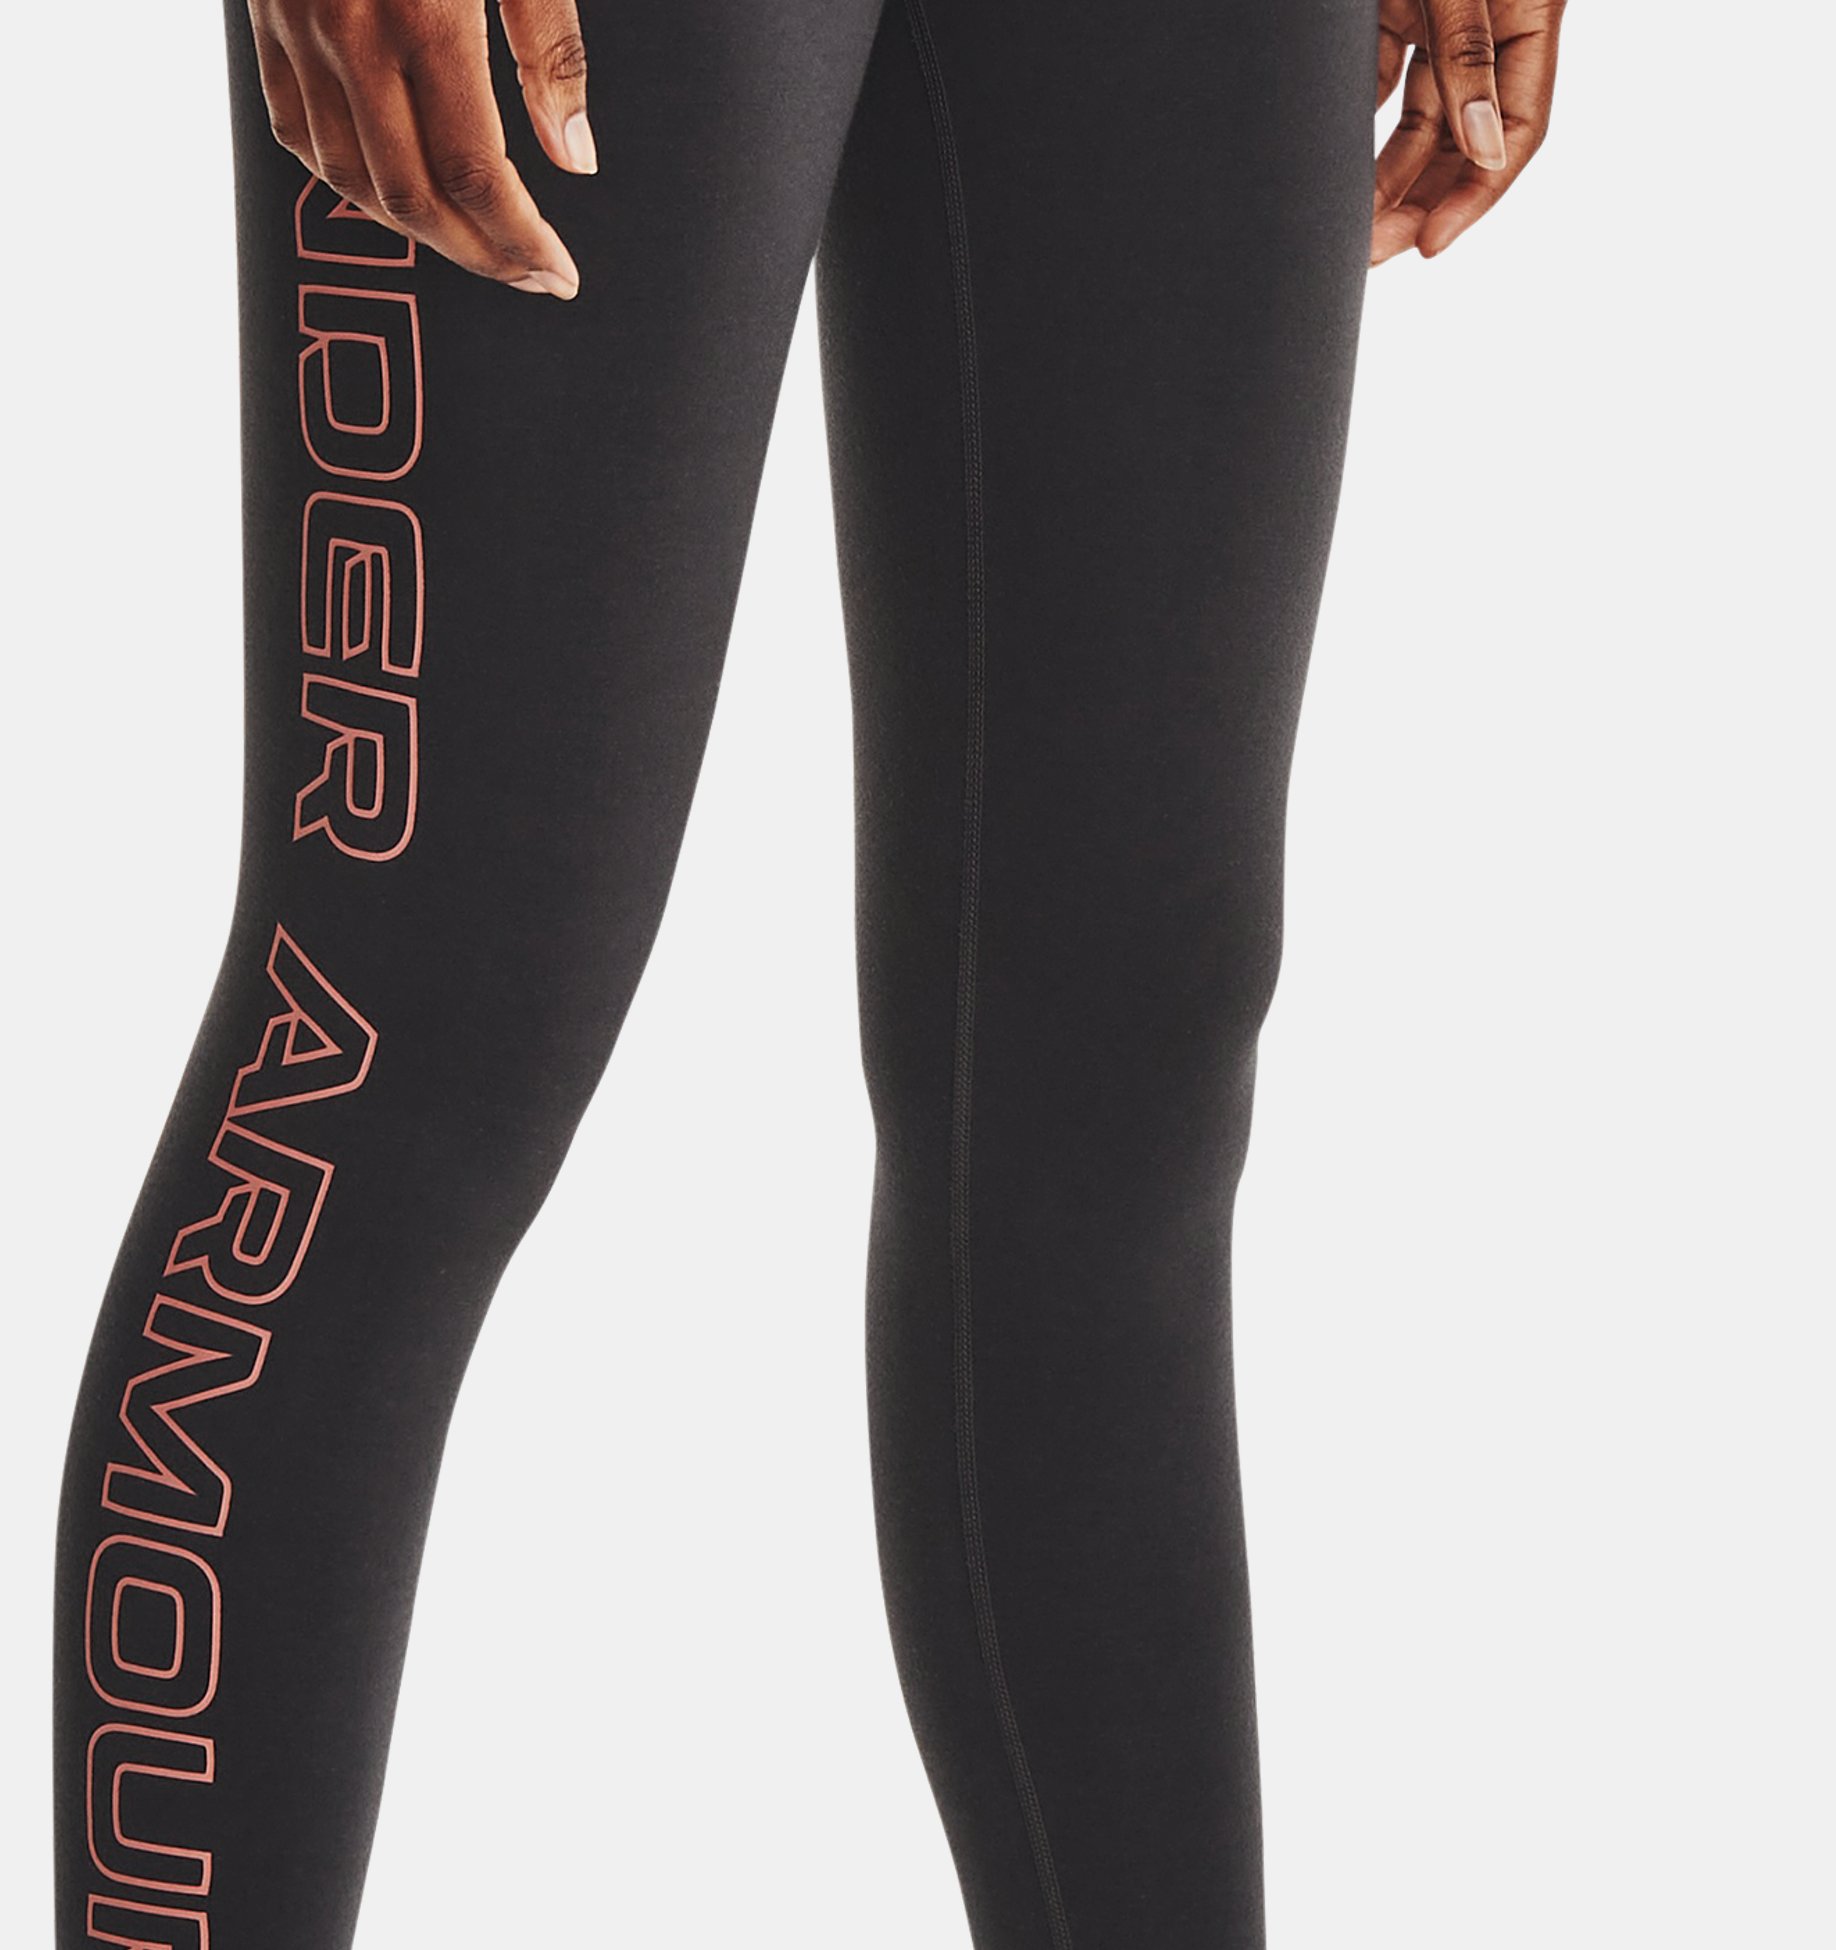 Leggings UNDER ARMOUR para mujer » online en ABOUT YOU